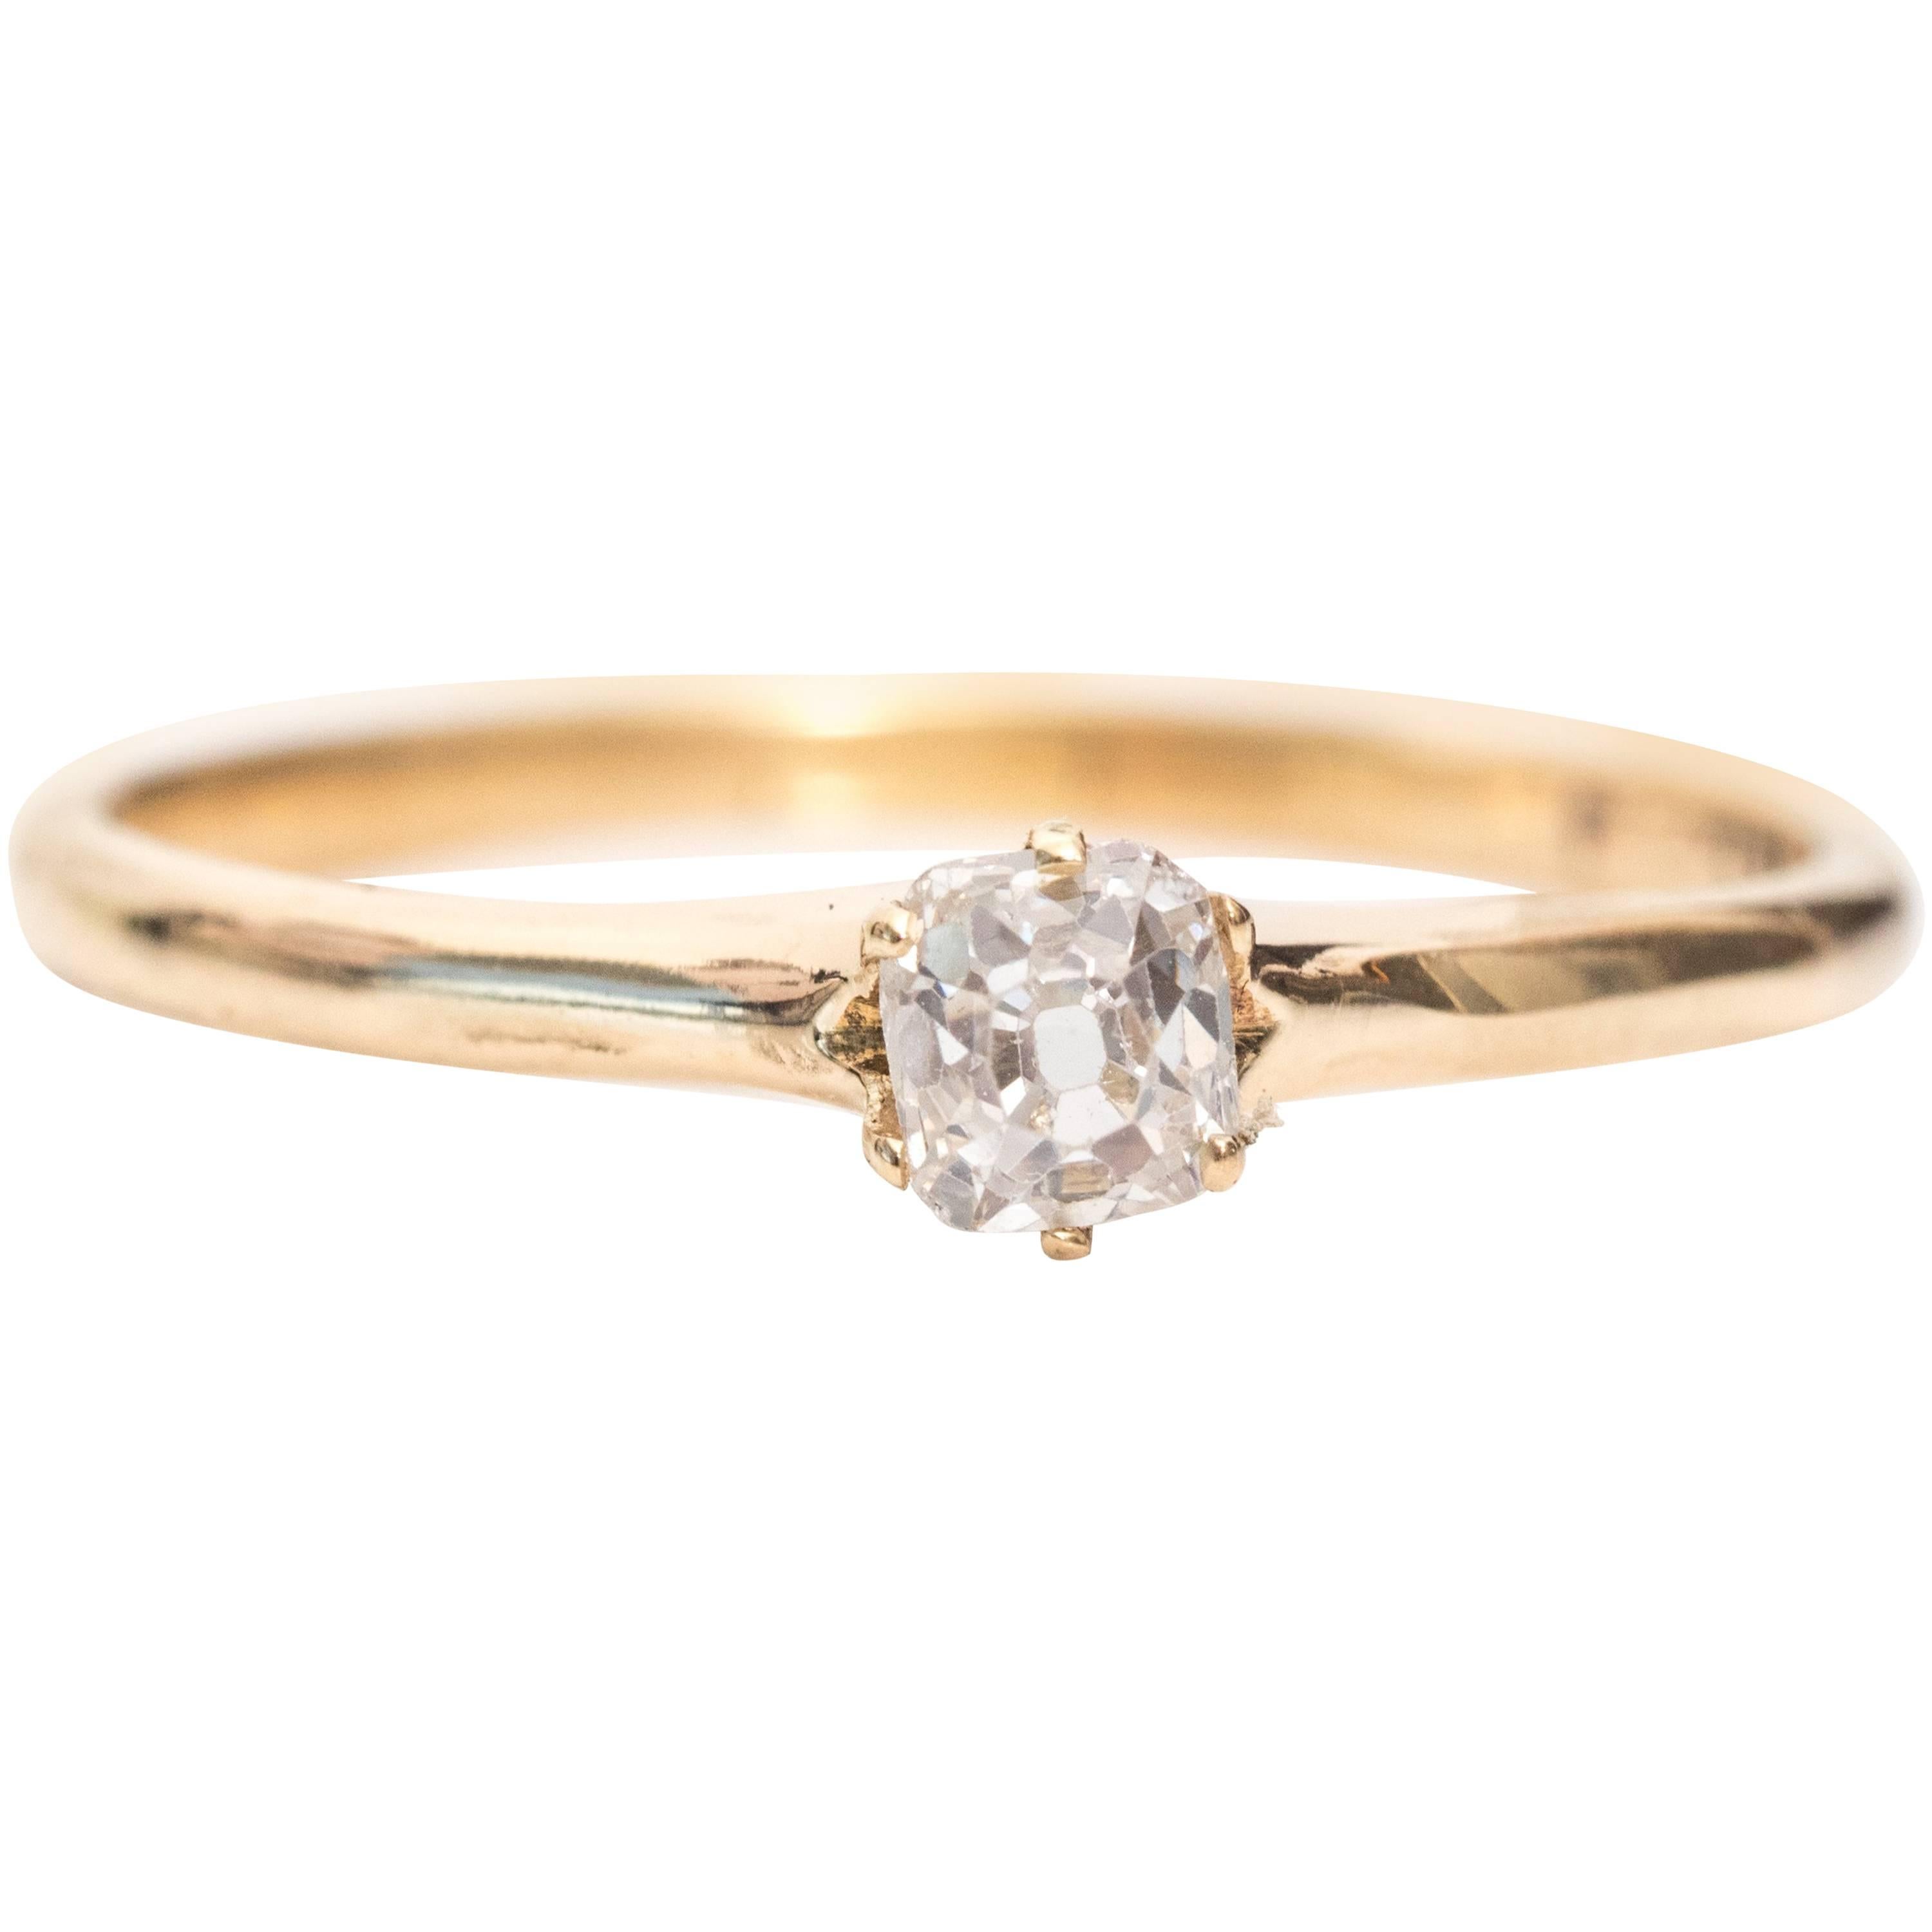 1890s 0.20 Carat Old Mine Diamond Solitaire 14K Yellow Gold Engagement Ring